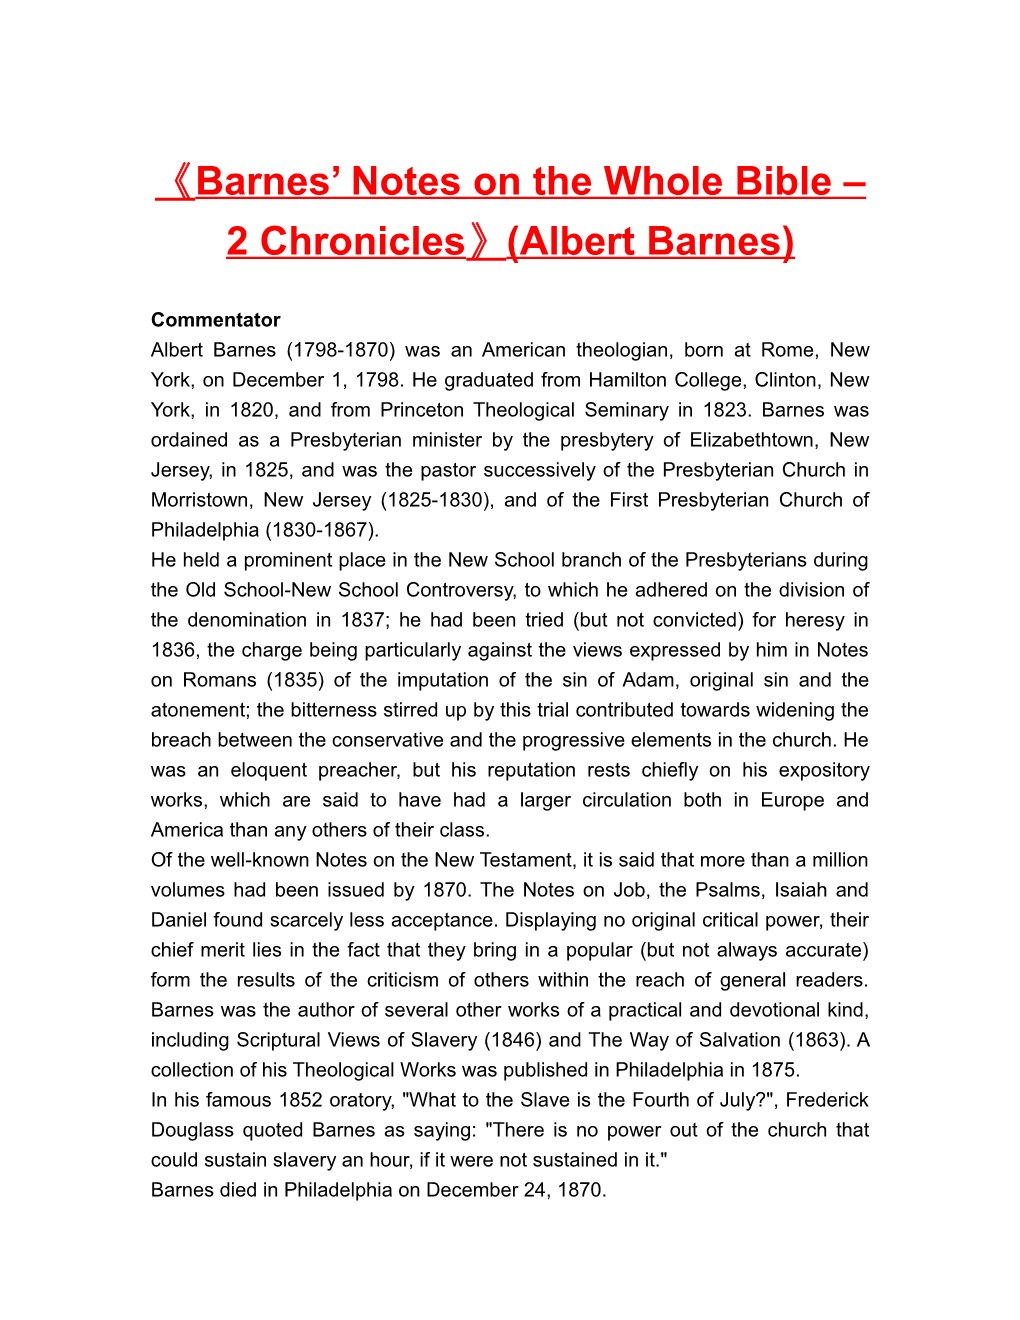 Barnes Notes on the Whole Bible 2 Chronicles (Albert Barnes)